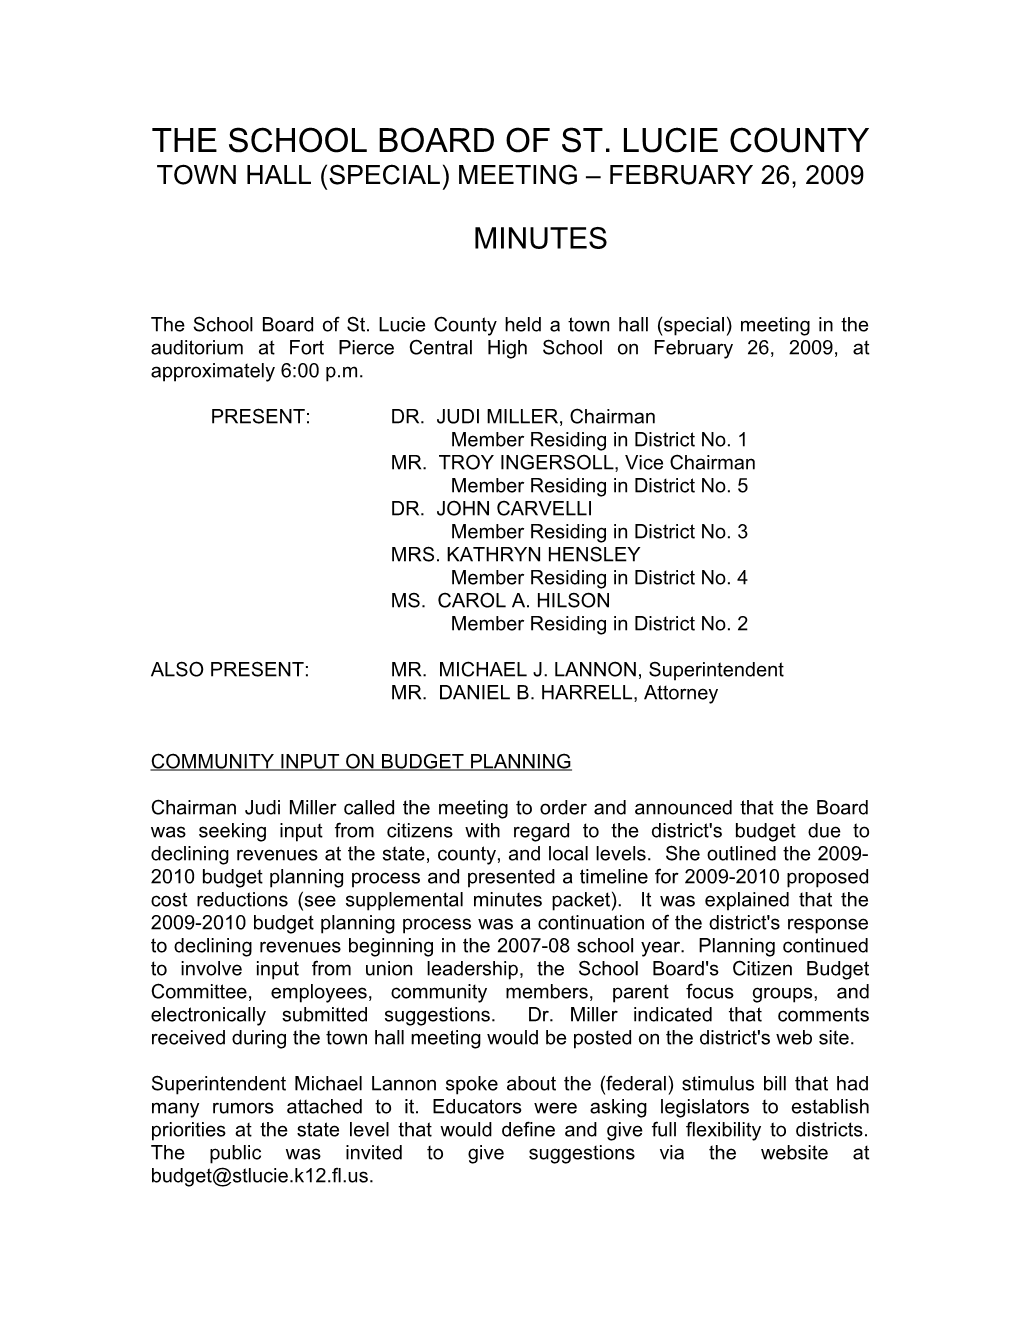 02-26-09 SLCSB Special (Town Hall) Meeting Minutes